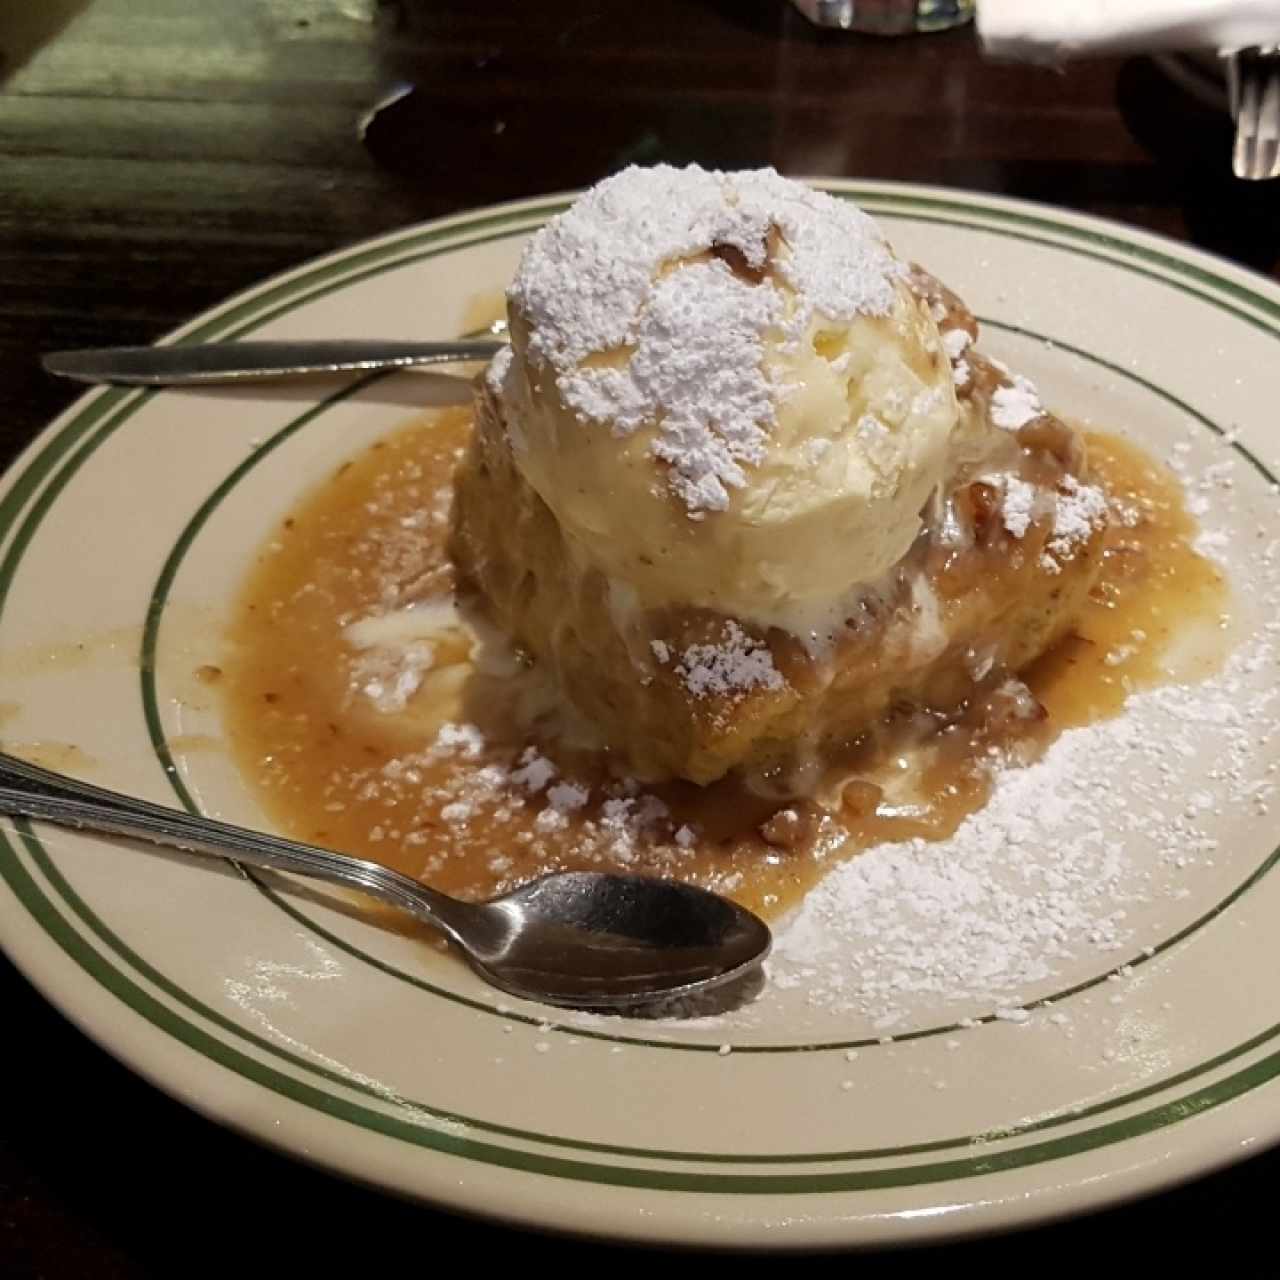 Housemade Bread Pudding with Praline Sauce